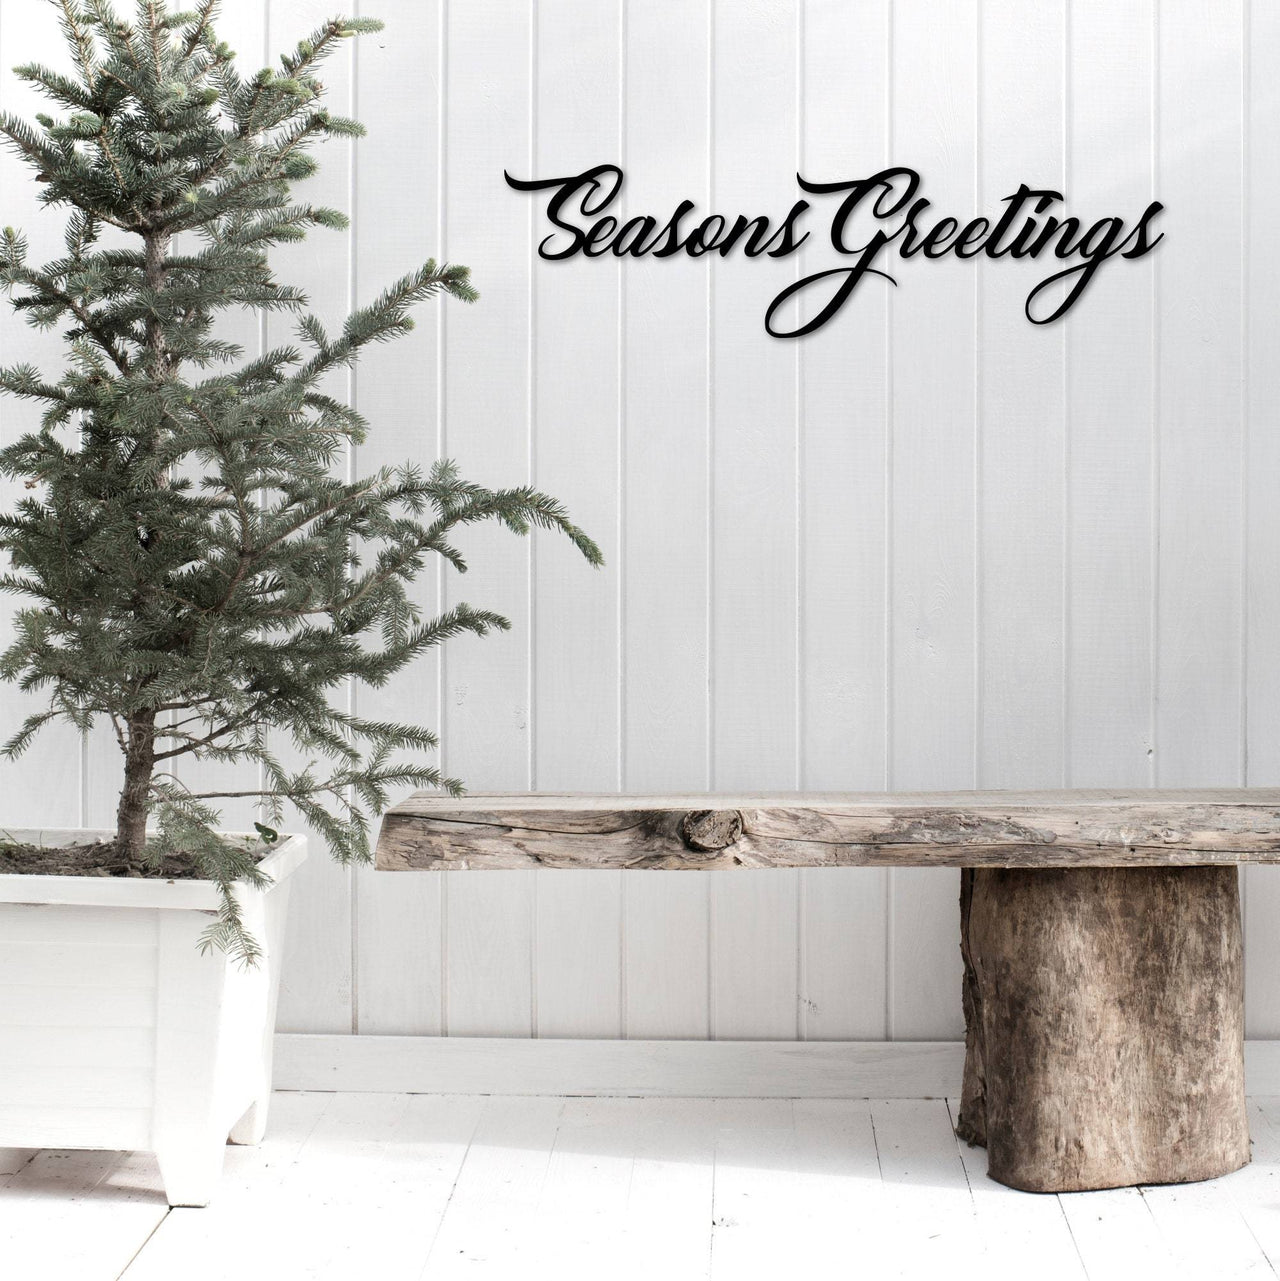 Seasons Greetings Sign | Metal Wall Decor | Steel Script Words for the Wall | Holiday Sign | Christmas Decor | Winter Sign | Office Decor